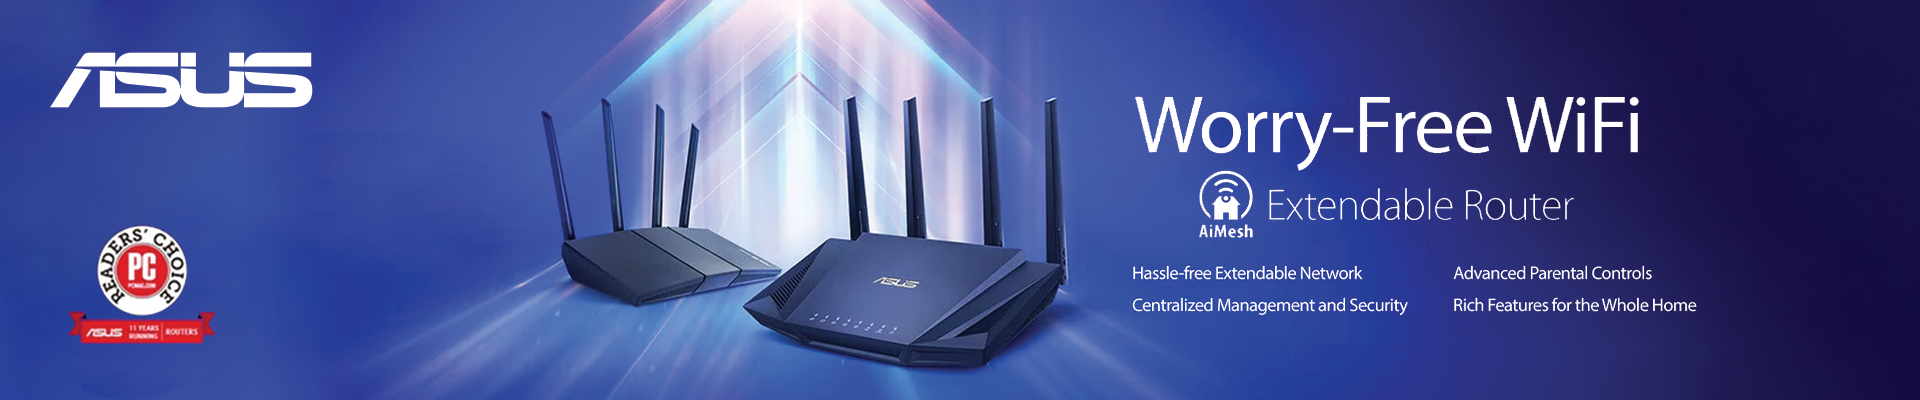 router_worry_free_wifi